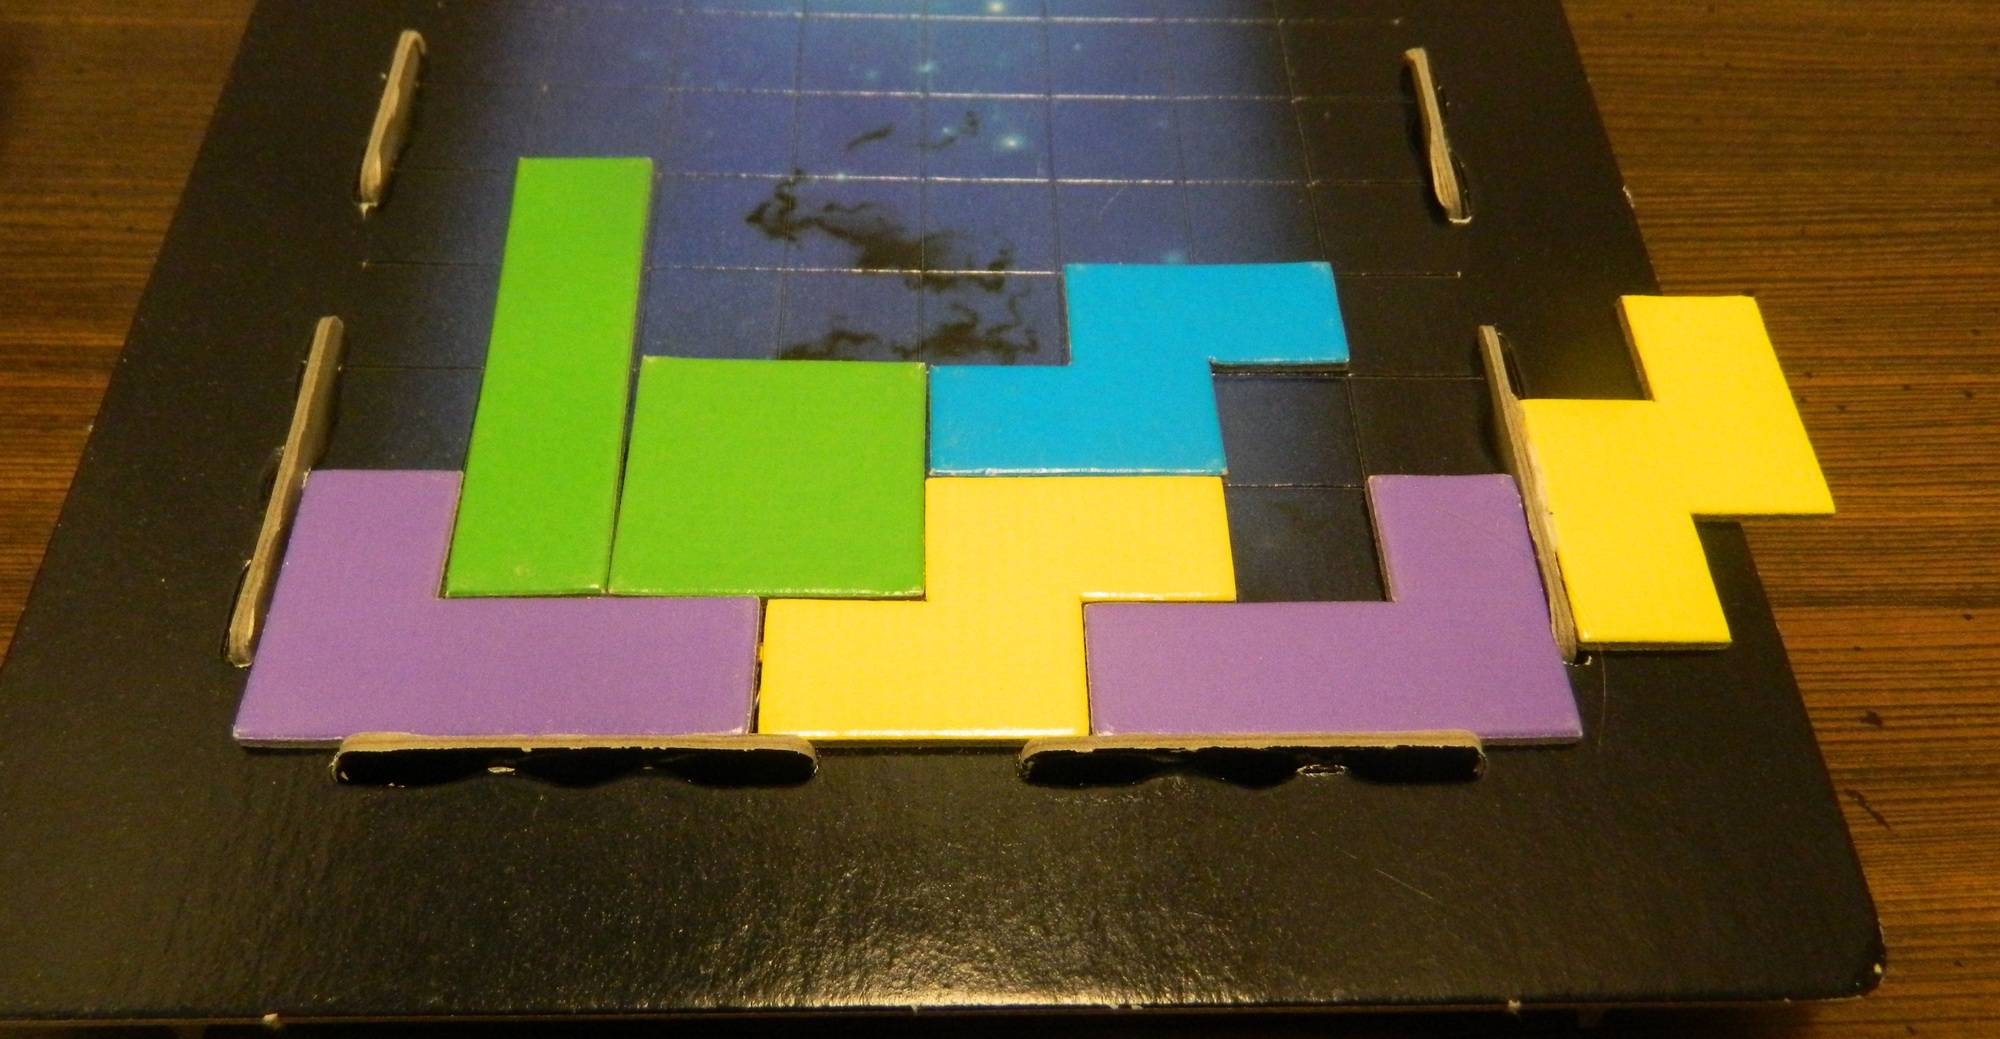 Tetris (1989 Milton Bradley) Board Game Review and Rules - Geeky